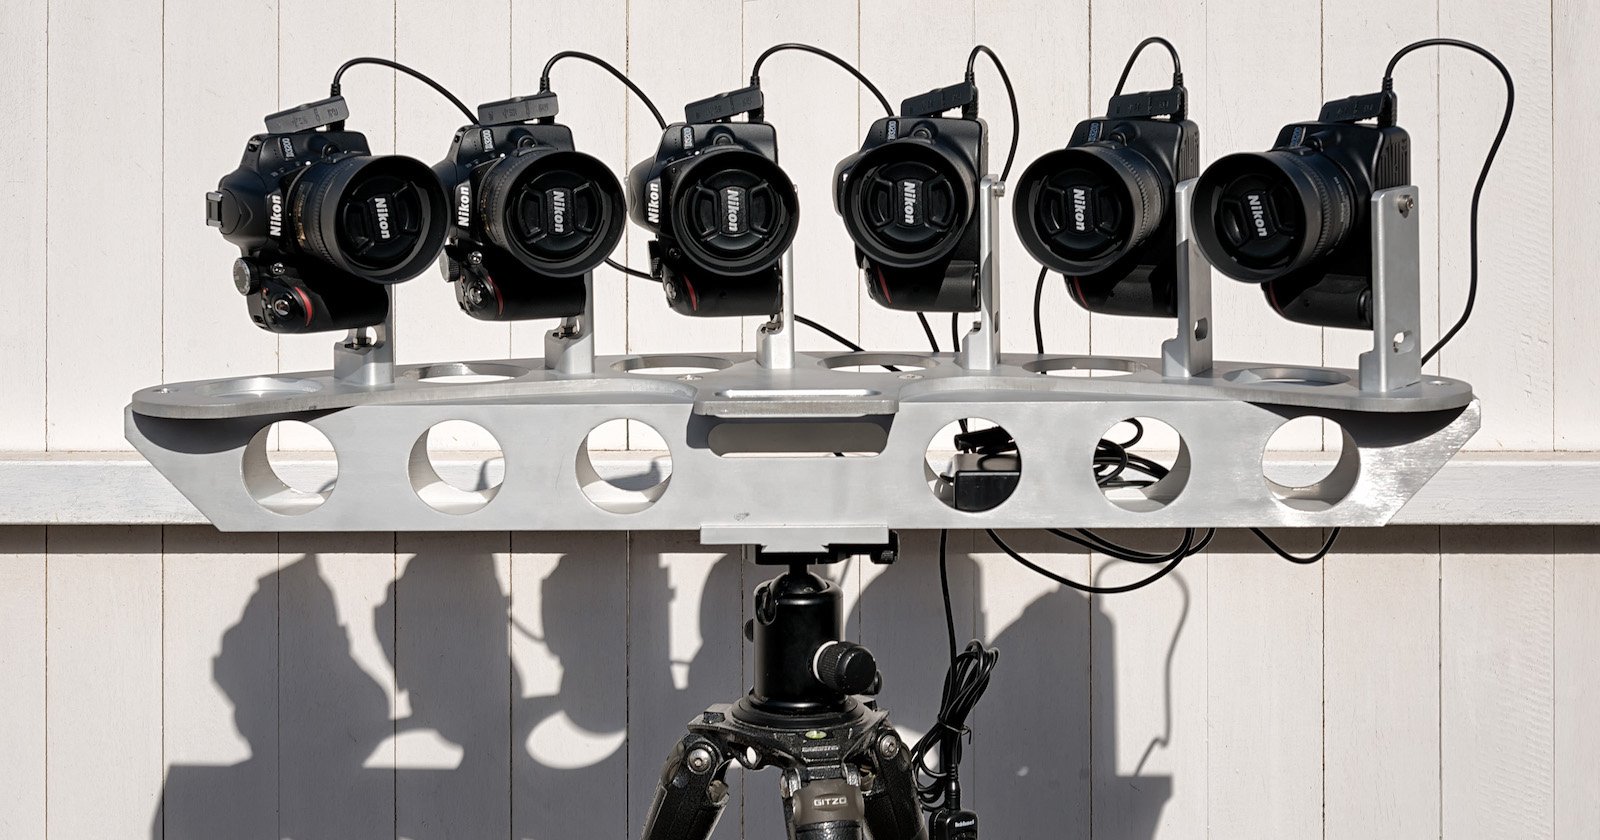 I Built a Panoramic Photo Rig Made of 6 Nikon DSLRs, and Its Awesome